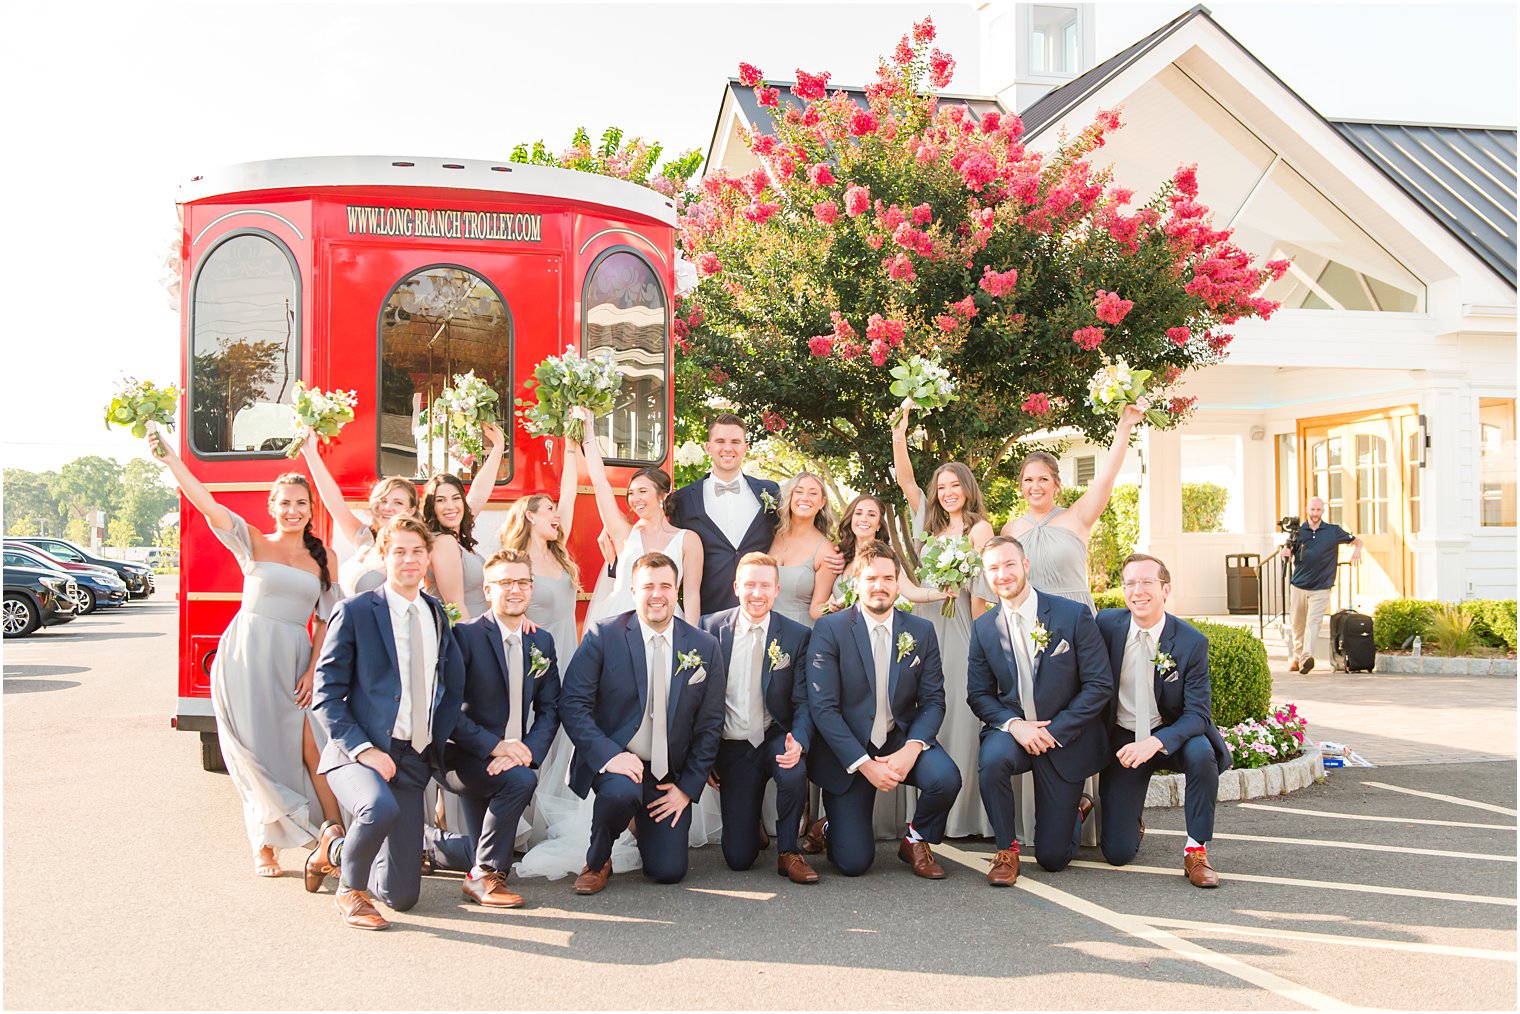 newlyweds cheer with wedding party kneeling by red trolley at Crystal Point Yacht Club